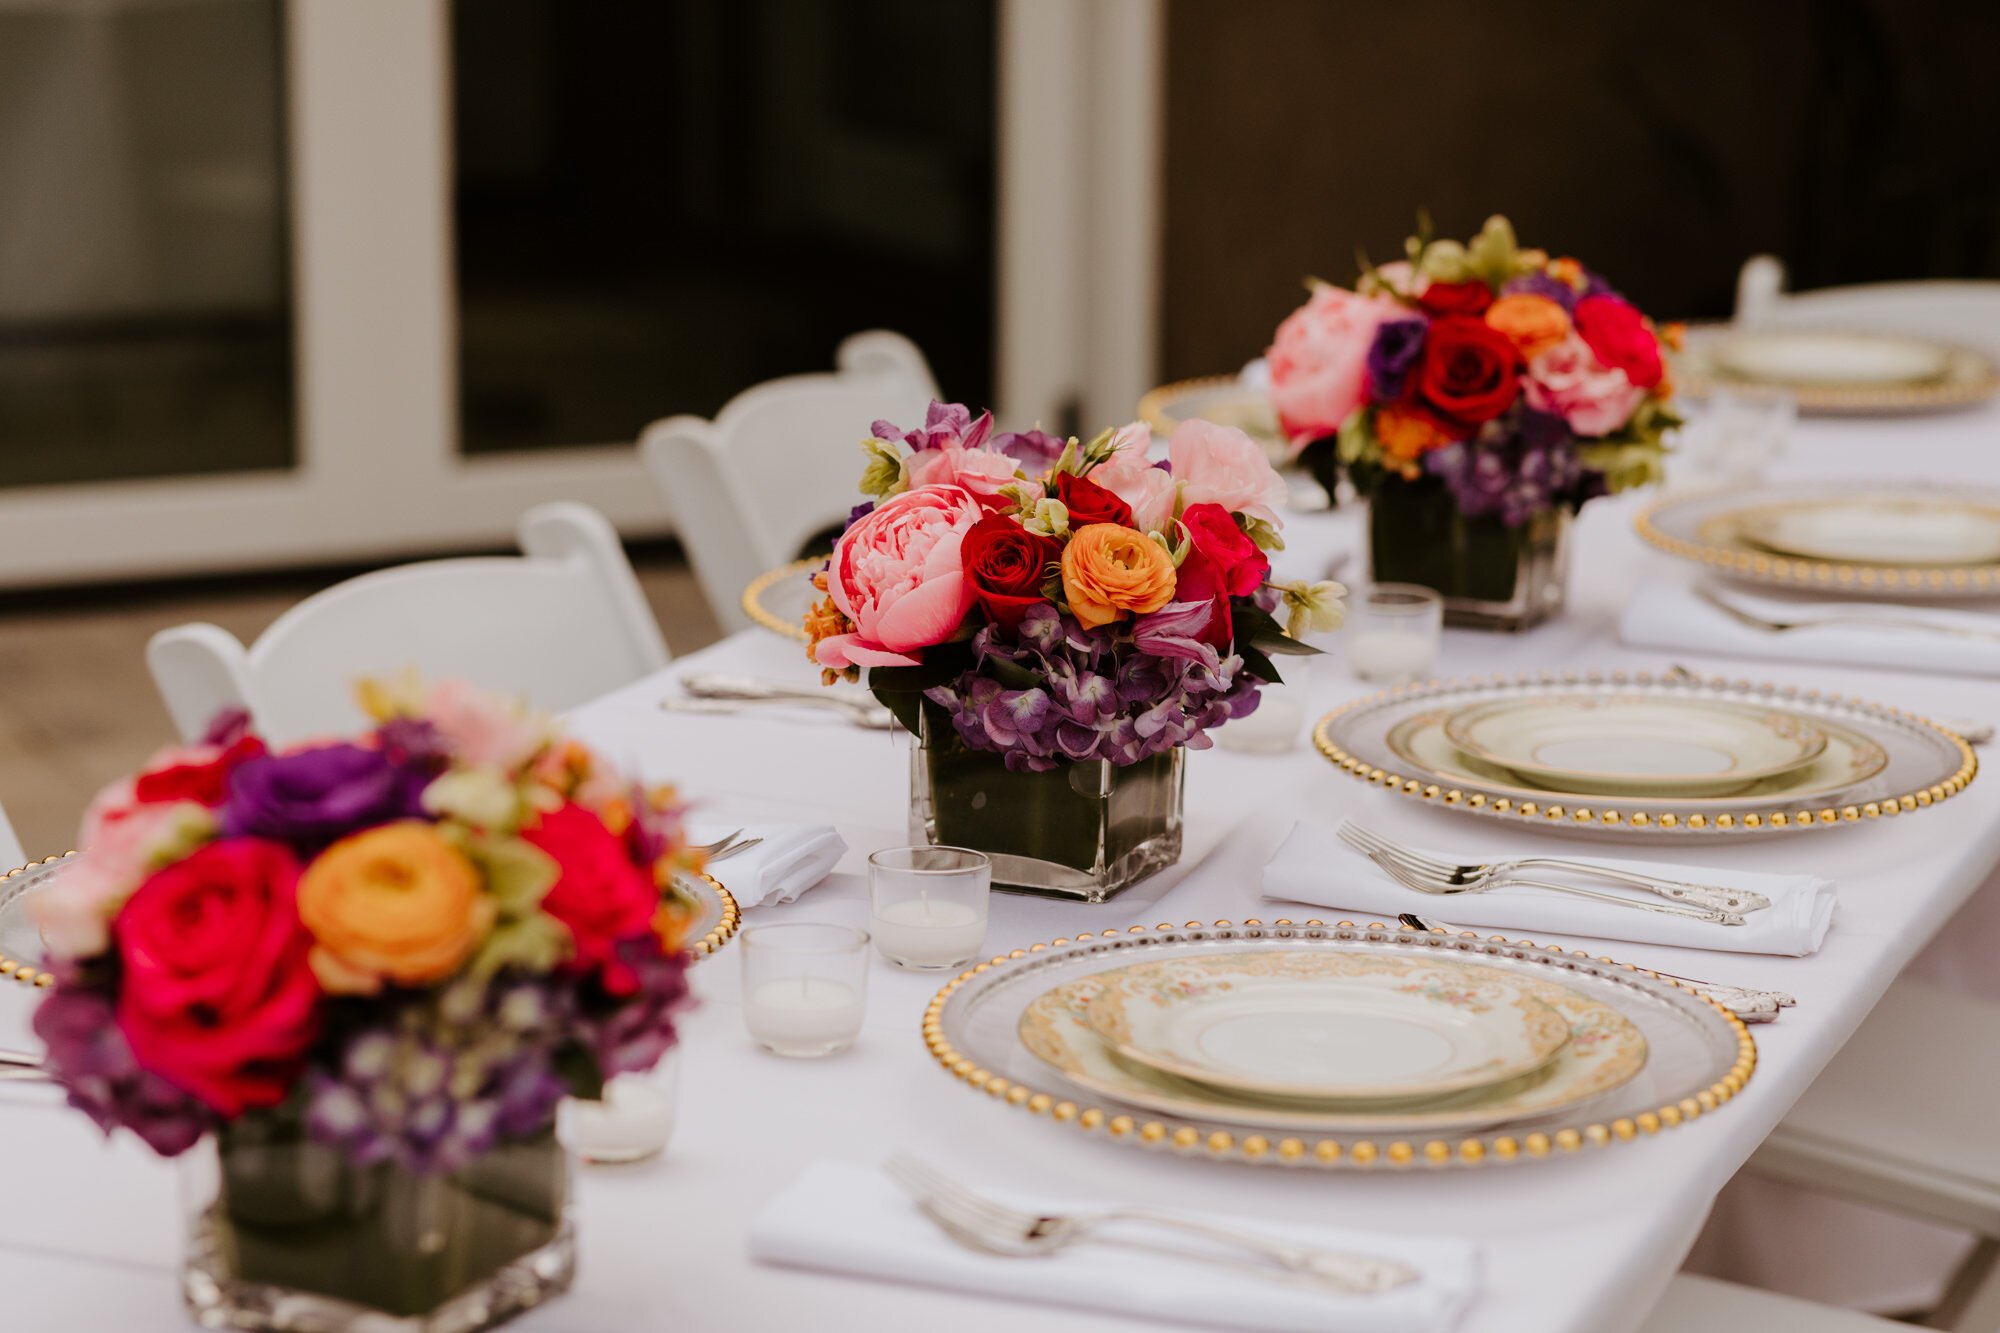 Minimalist and simple wedding table setting, colorful pink purple and orange flower centerpieces, gold rimmed white plates, white tablecloth, Tida Svy Photography | www.tidasvy.com